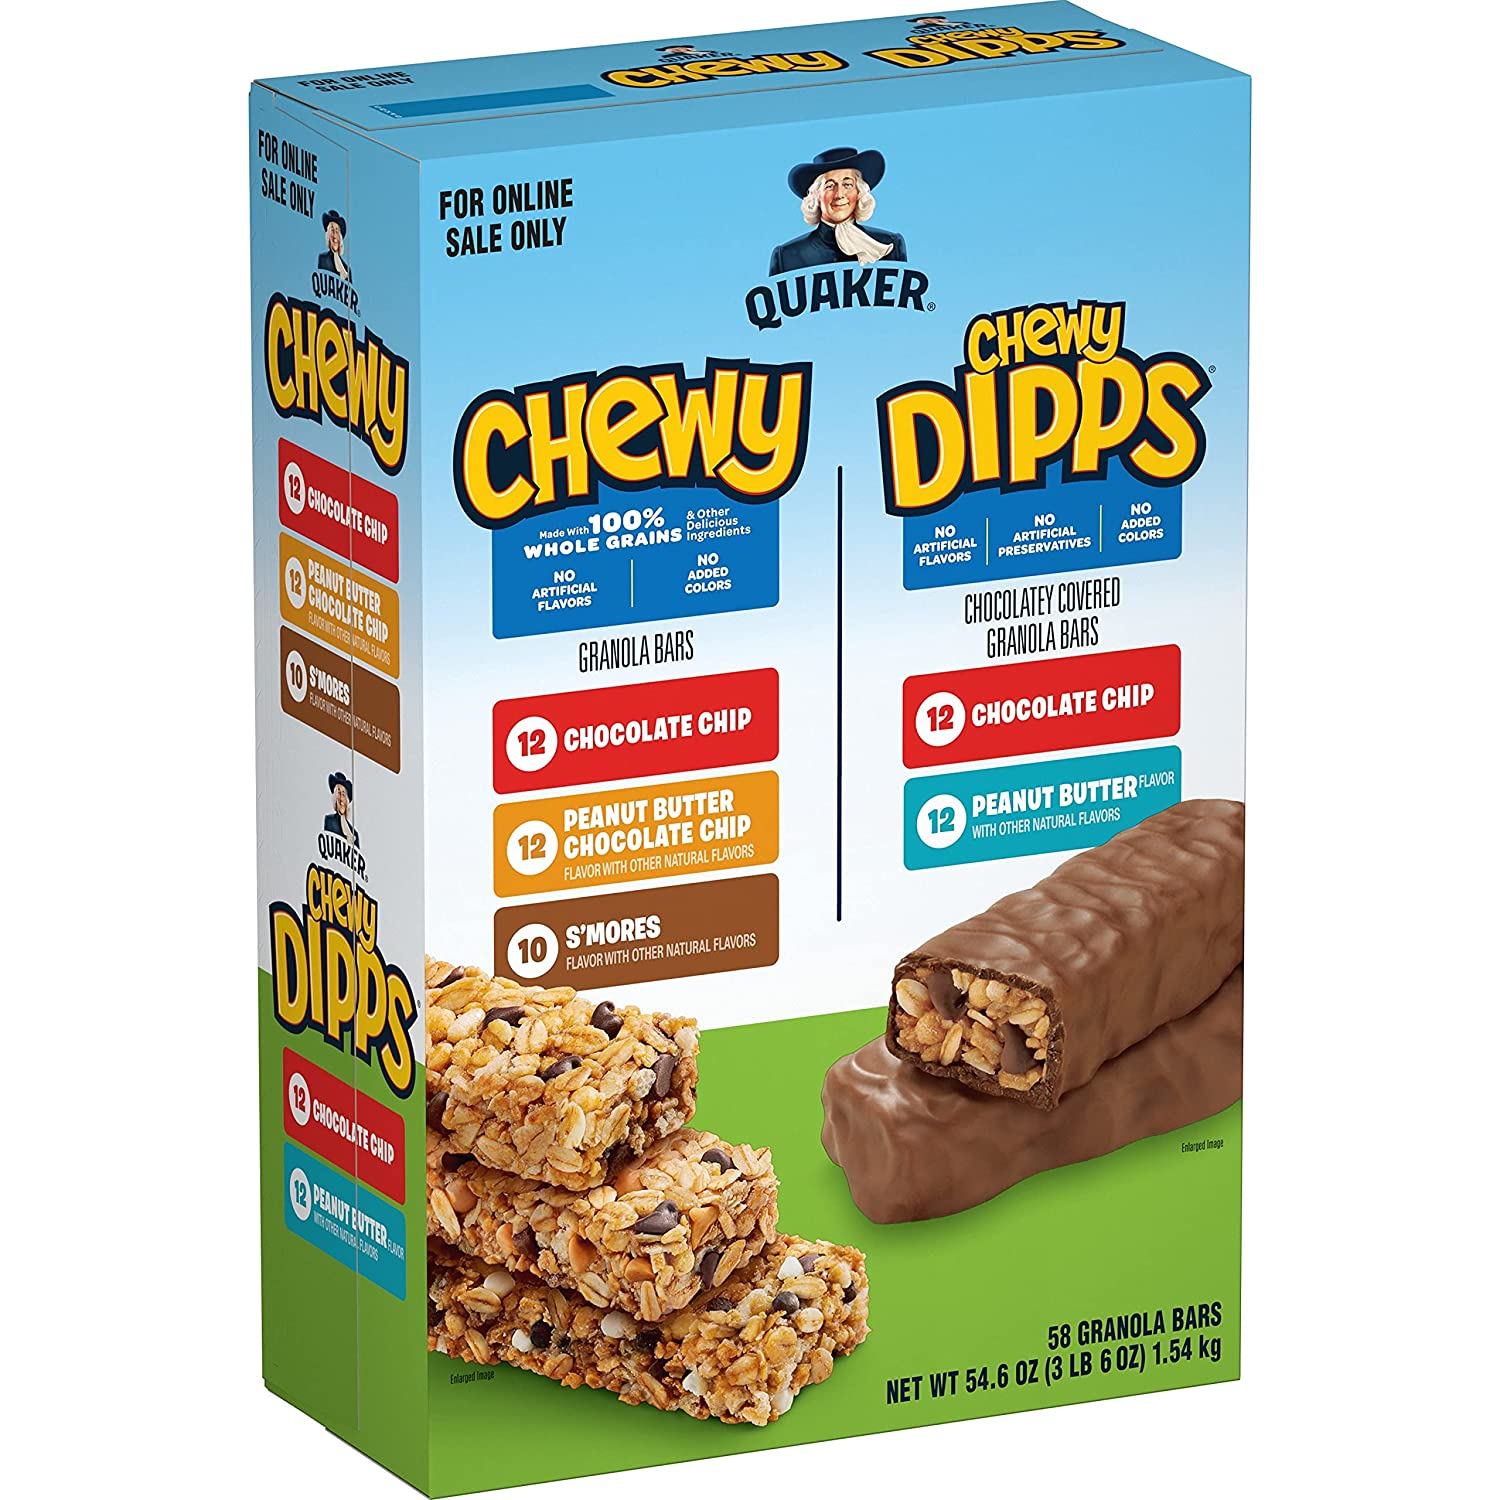 Quaker Chewy Granola Bars, Chewy & Dipps Variety Pack, (58 Bars)